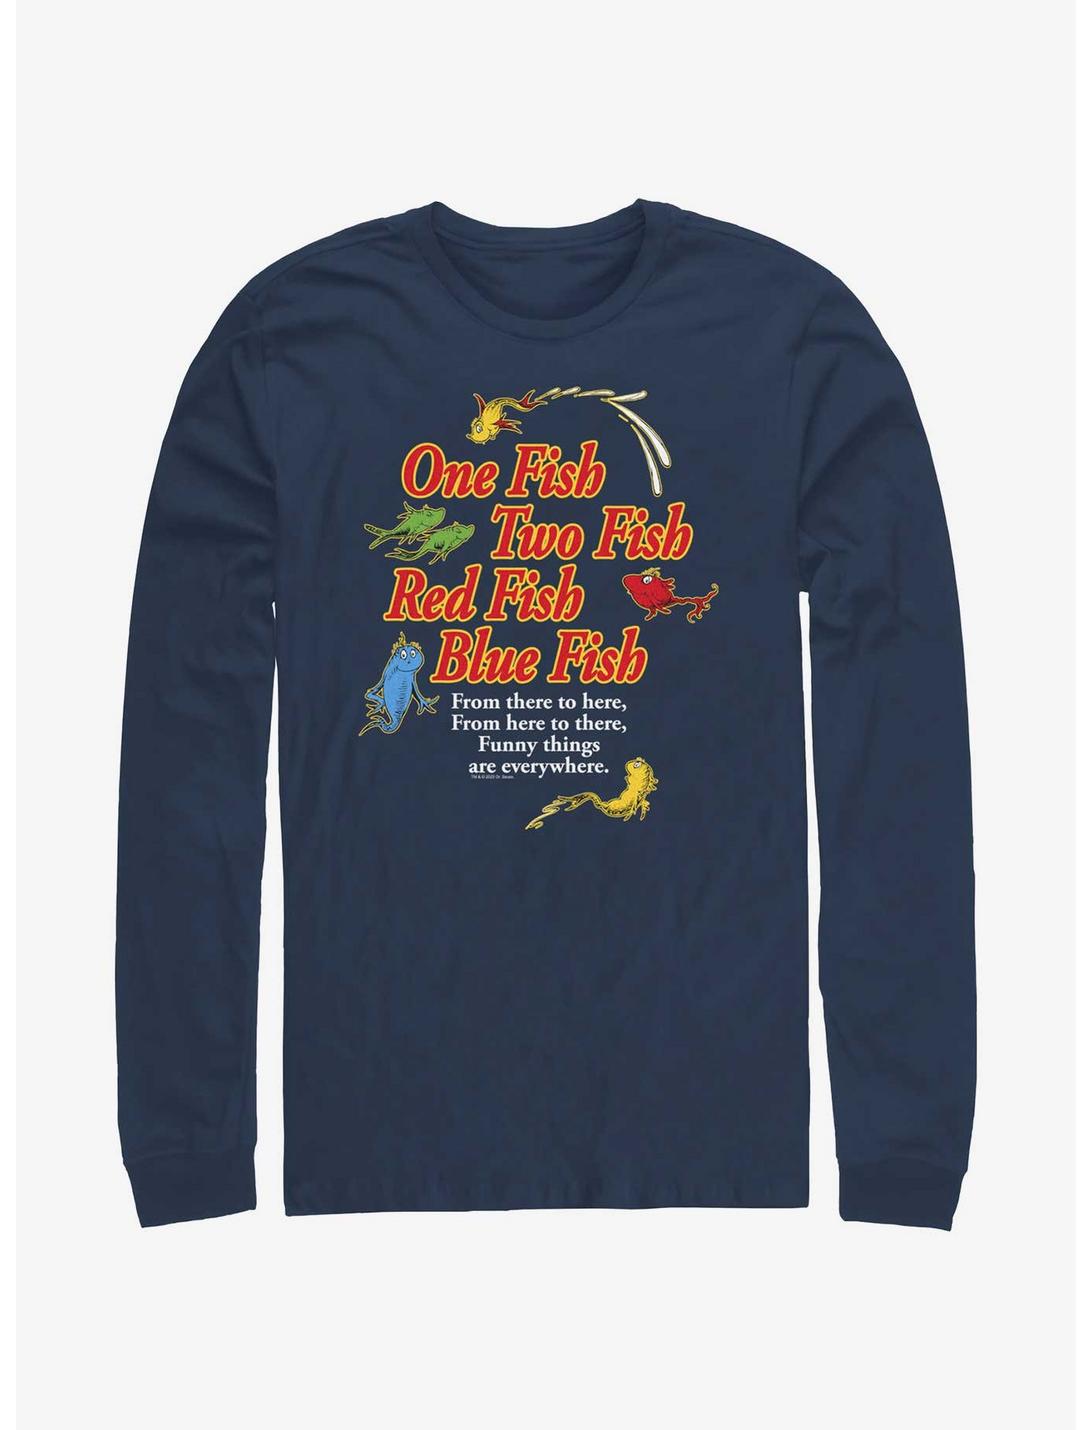 Dr. Seuss's One Fish, Two Fish, Red Fish, Blue Fish Funny Things Are Everywhere Long-Sleeve T-Shirt, NAVY, hi-res